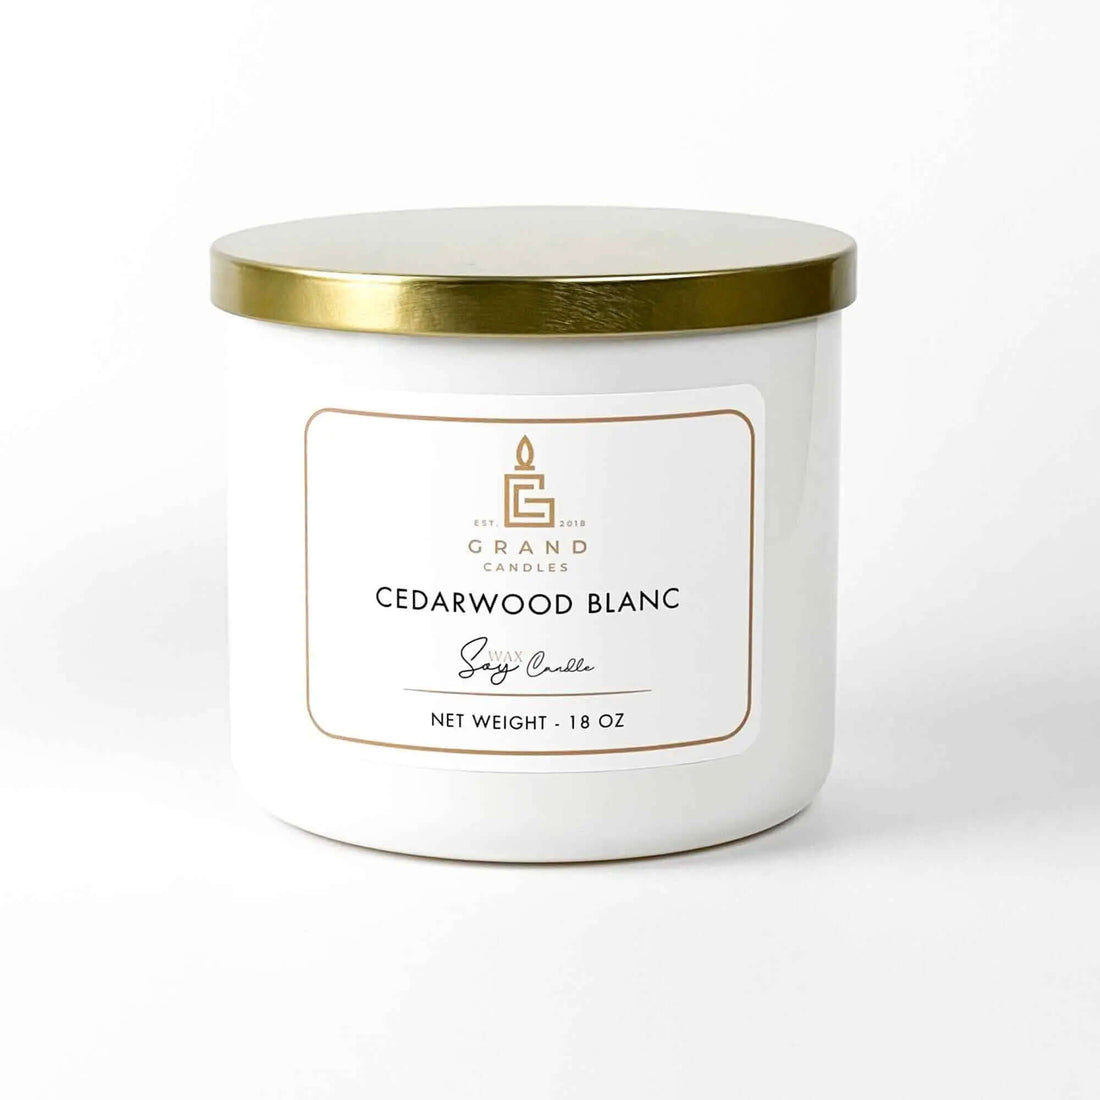 Scented Soy Wax Candle | Cedarwood Blanc Soy Candle | Luxury Home Scent